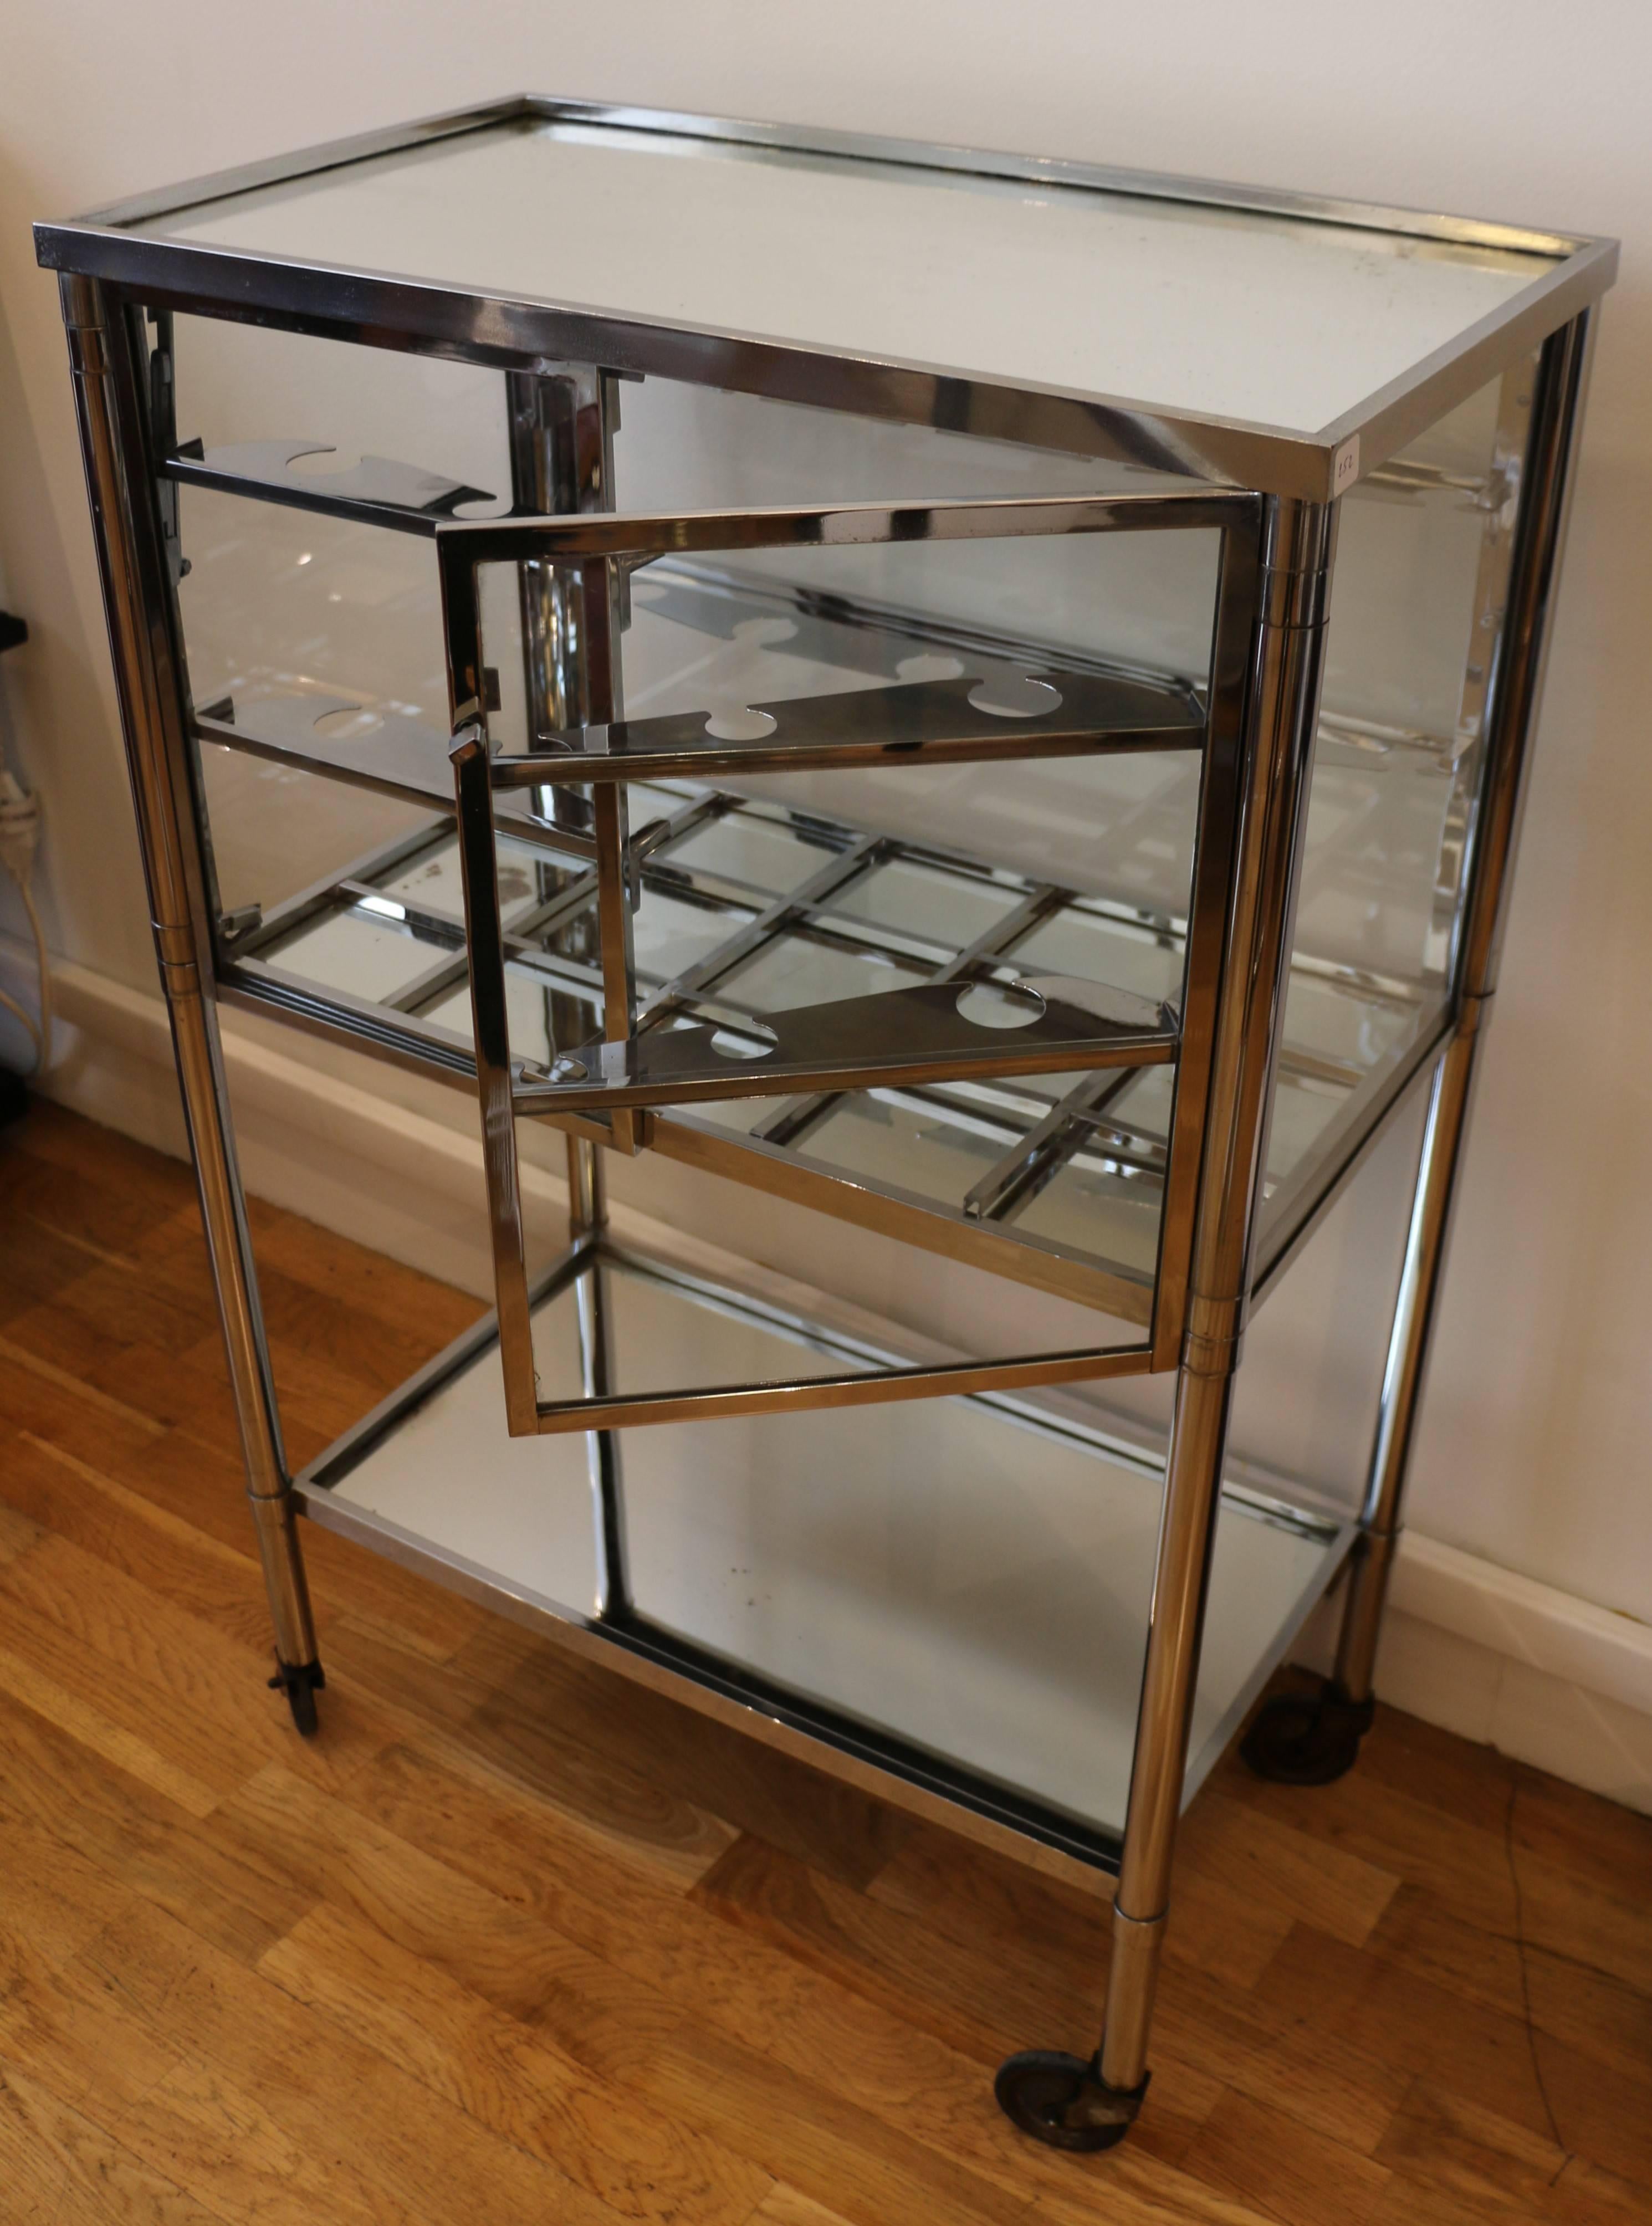 Bar cart on wheels by Jacque Adnet (1900-1984). Modernist style. Frame in Chromium plated metal, glass and mirrors. Two front doors, the two sides can be lifted to increase the size of the top. Top, middle and bottom shelves made of mirrors. Glass